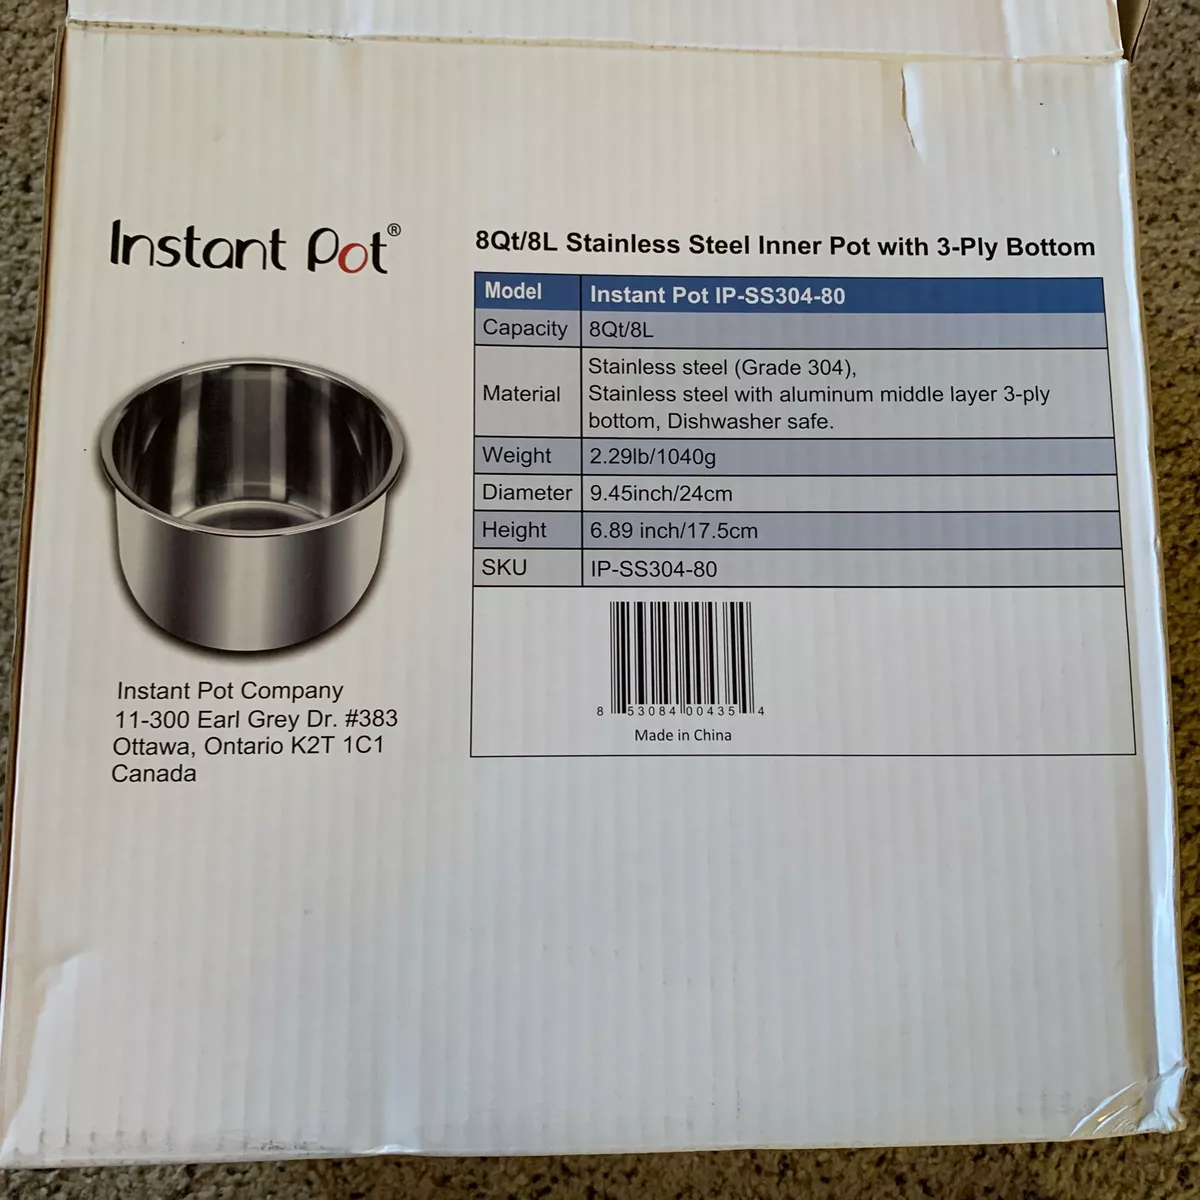  Instant Pot Stainless Steel Inner Cooking Pot with